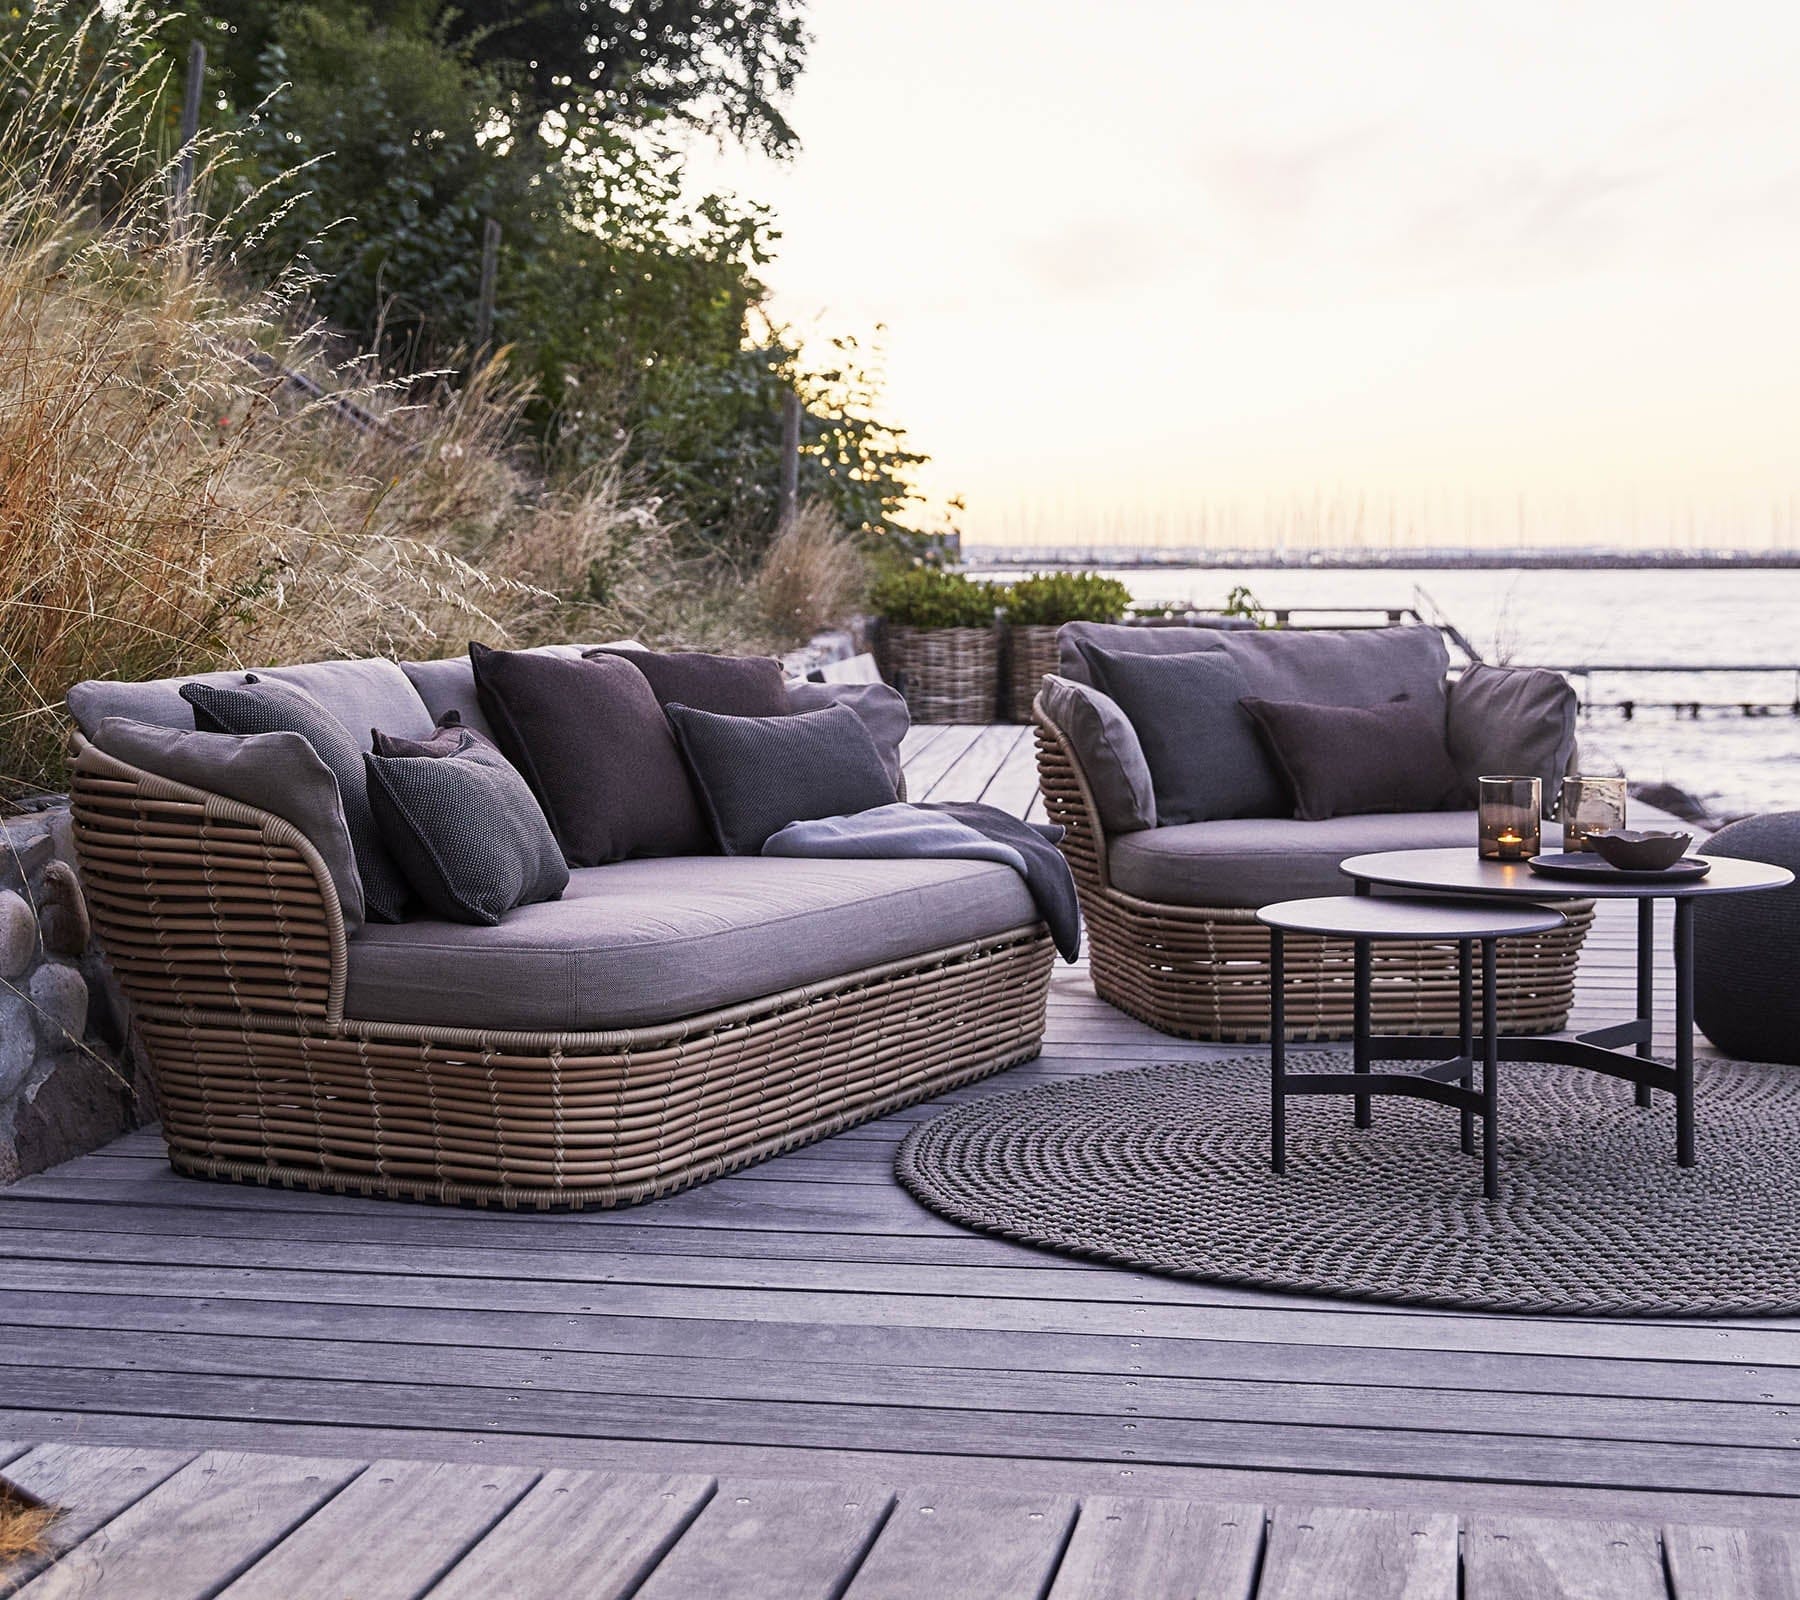 Boxhill's Basket 2-Seater Outdoor Sofa Natural lifestyle image on wooden platform